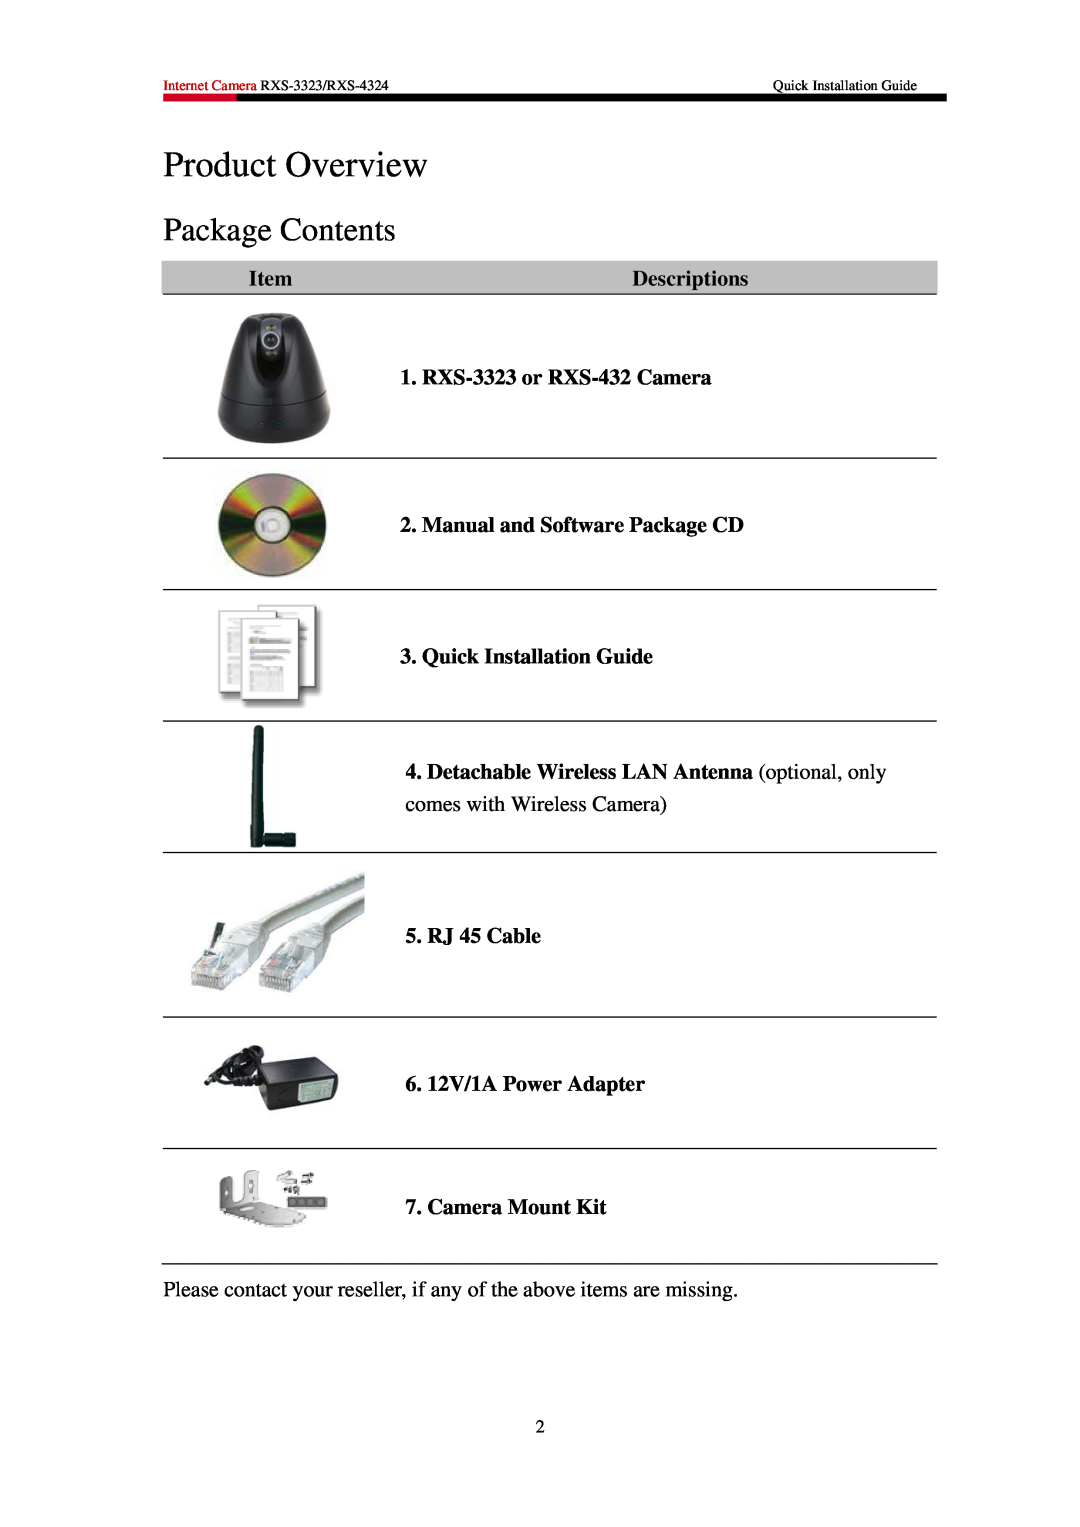 Rosewill manual Product Overview, Package Contents, Internet Camera RXS-3323/RXS-4324, Quick Installation Guide 